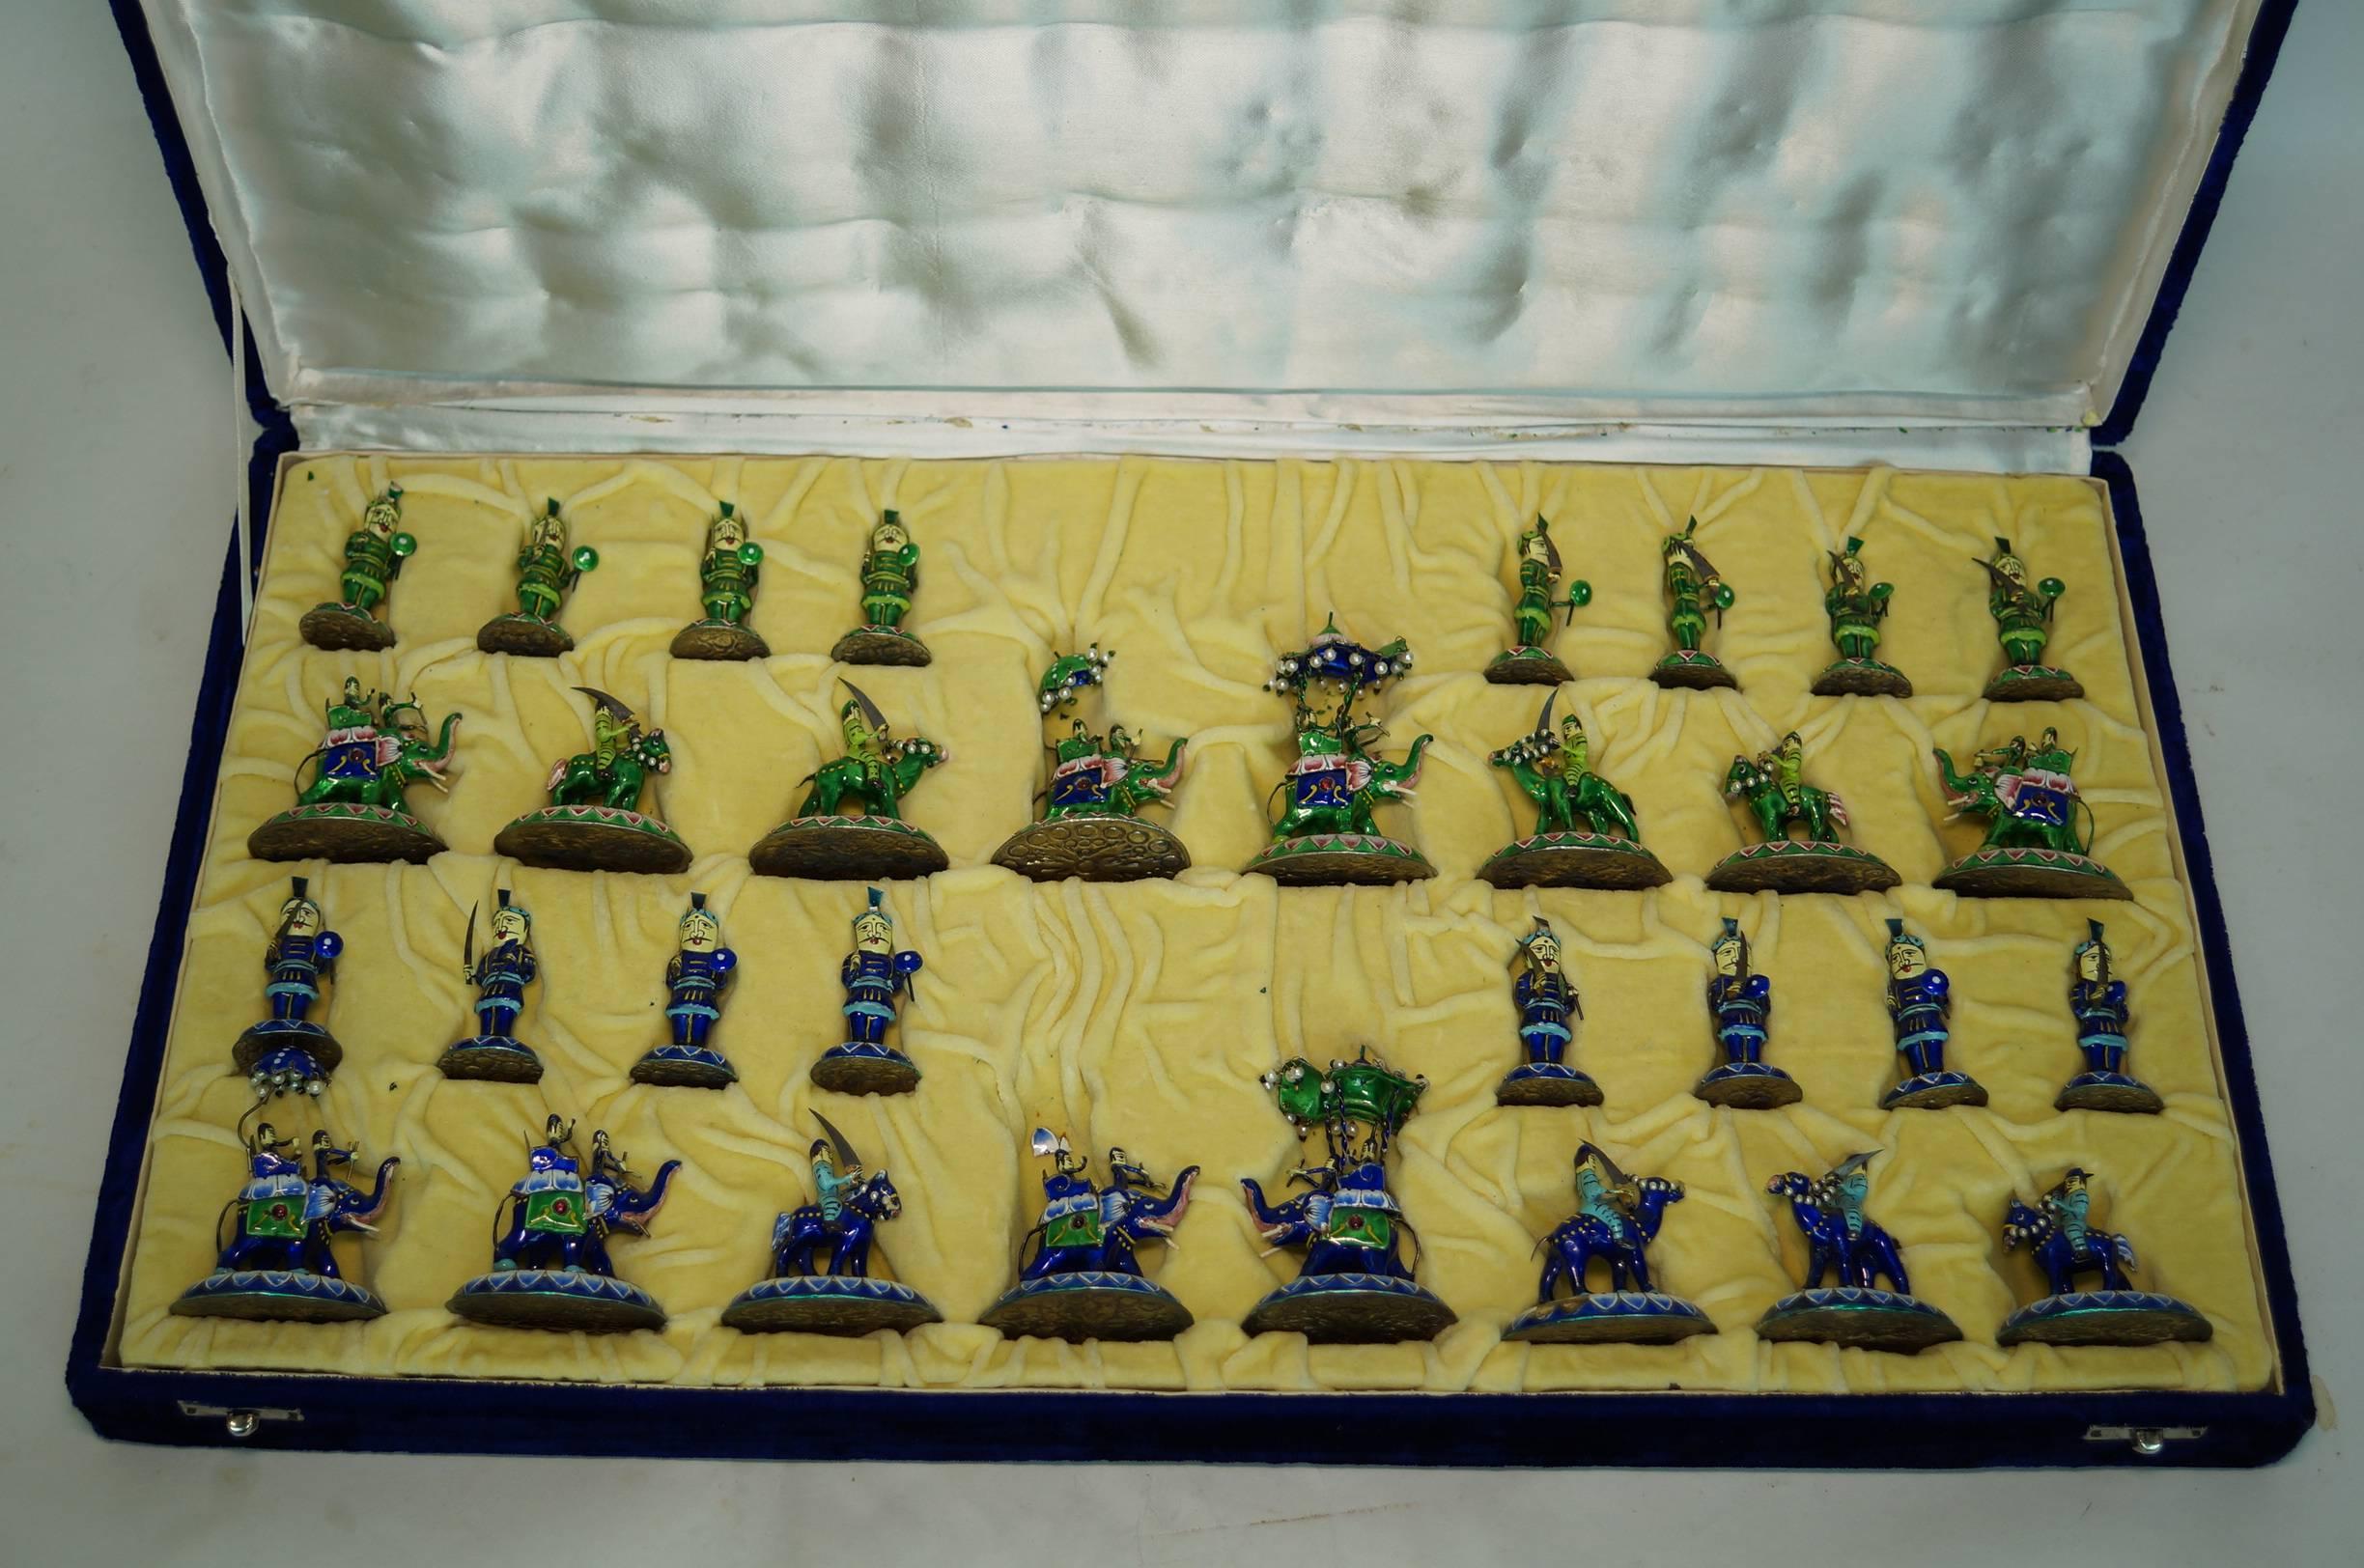 Fine and complete blue and green enamel chess set in original box.